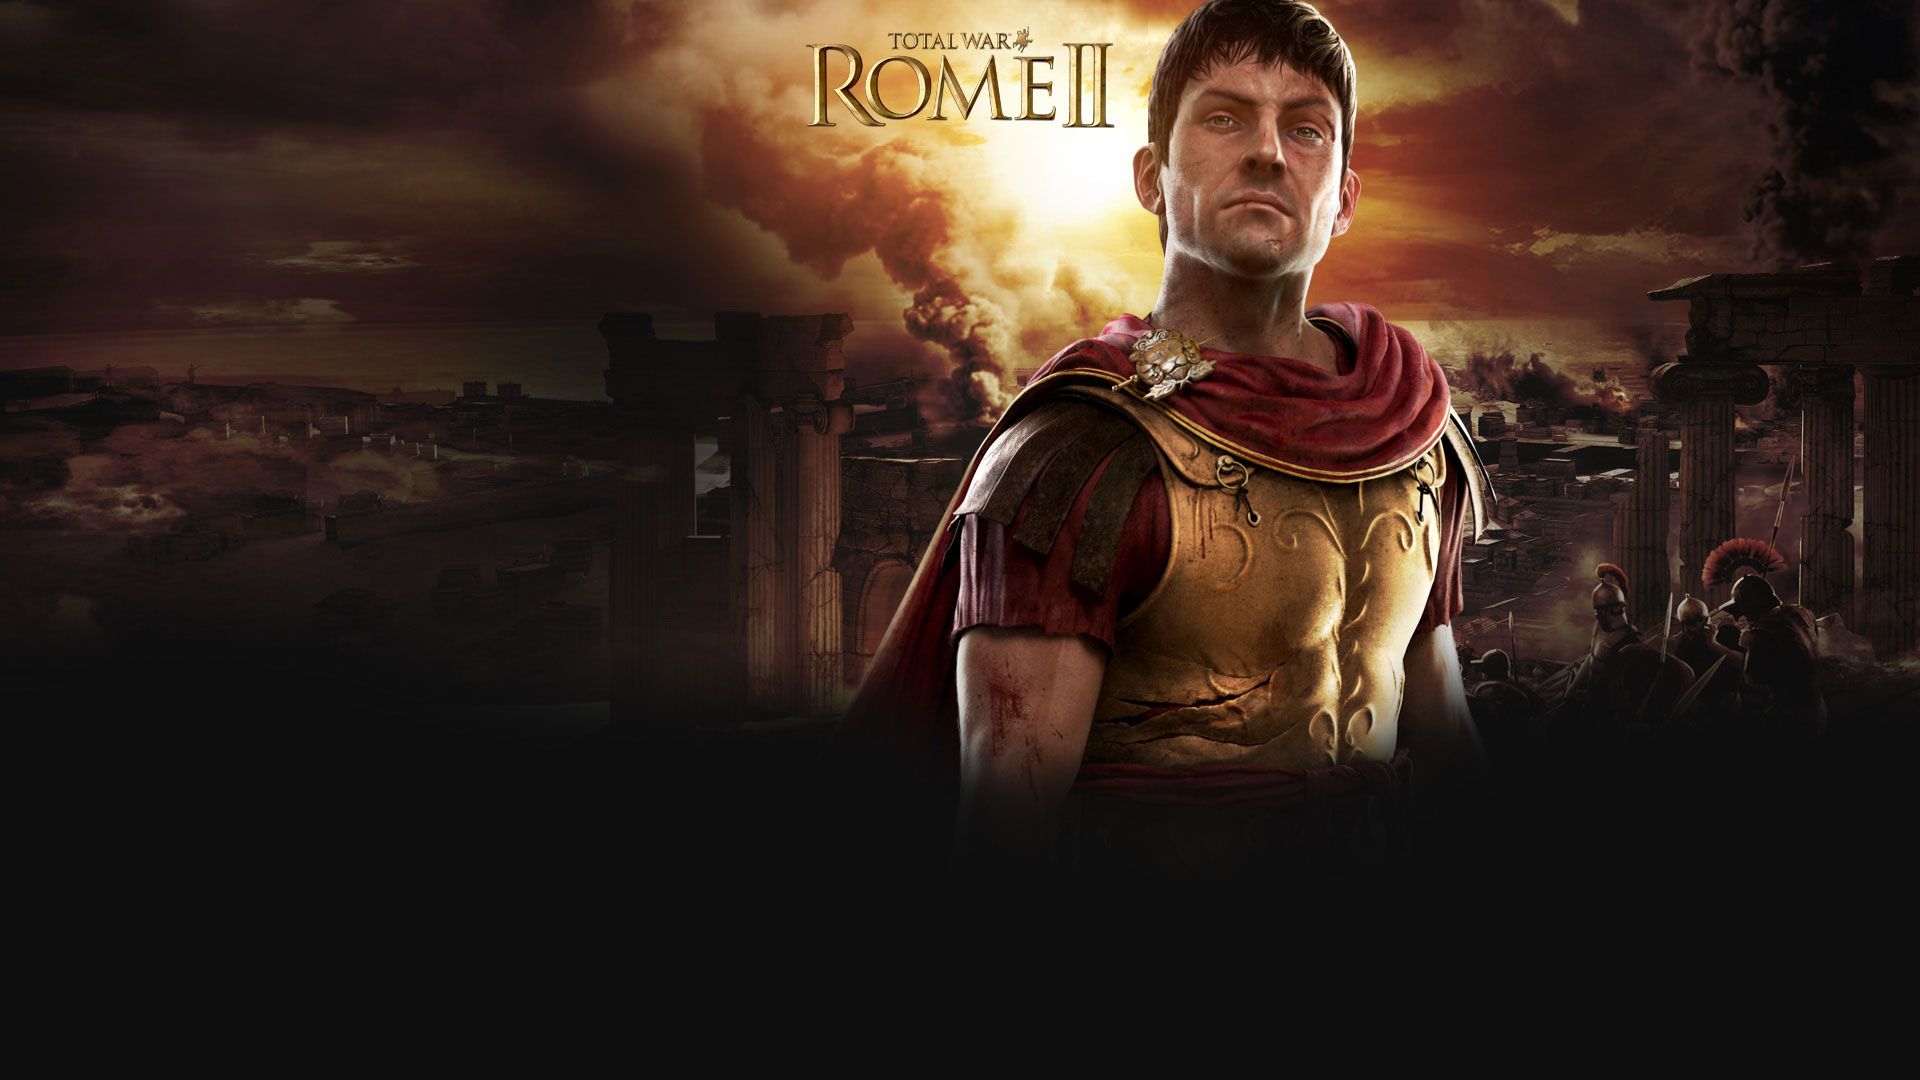 2013 Total War Rome 2 Game Wallpapers | HD Wallpapers